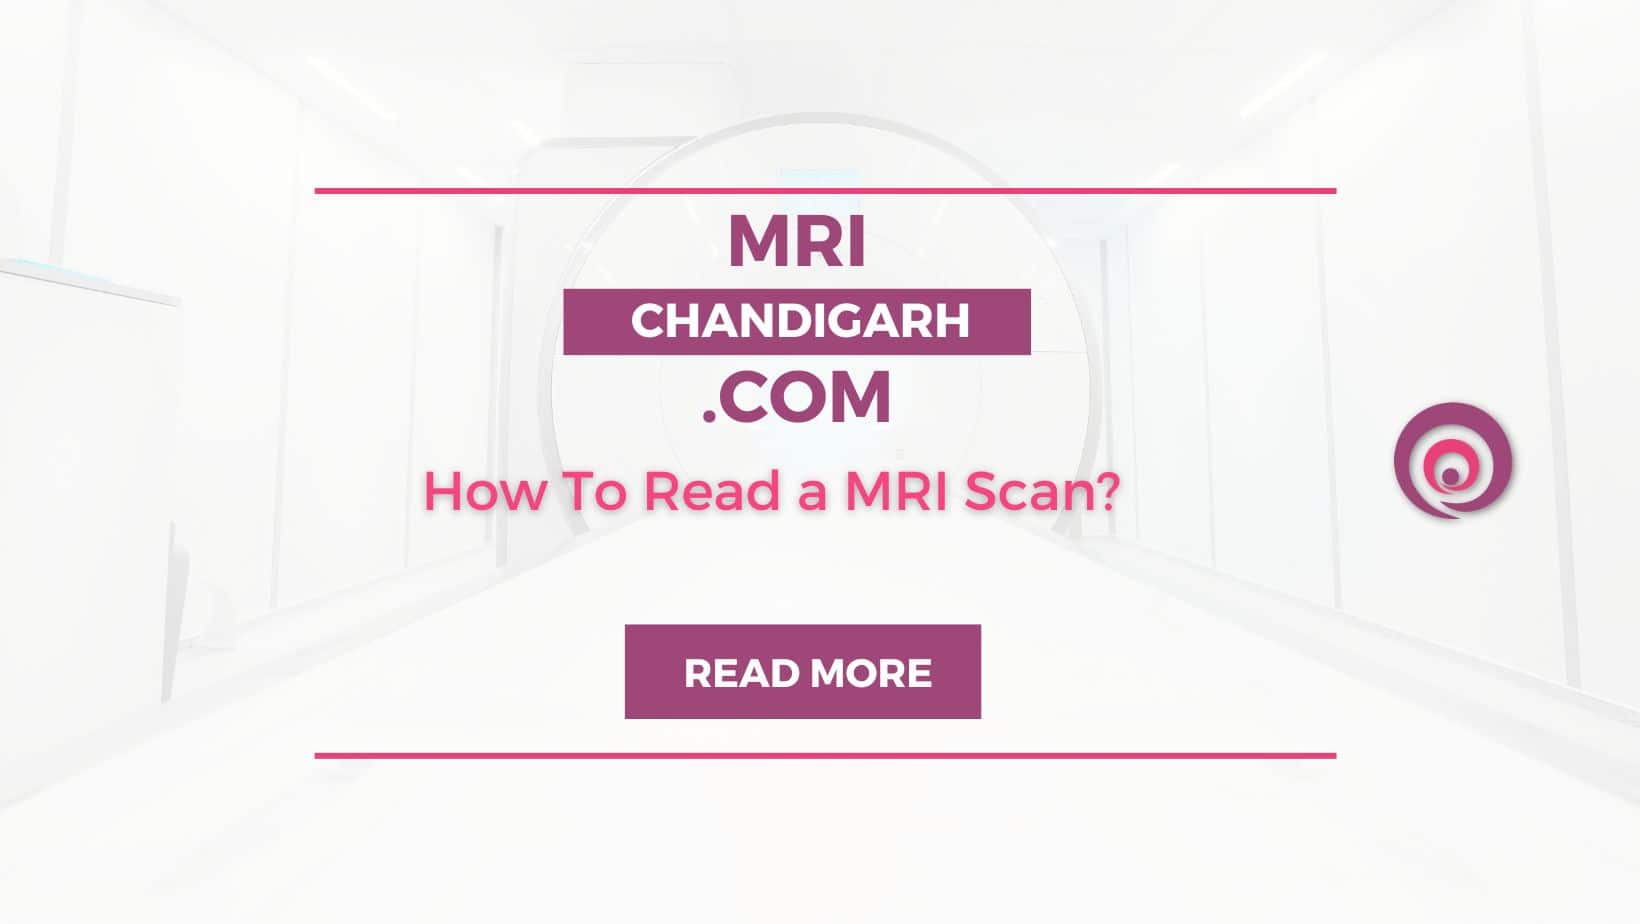 How To Read a MRI Scan